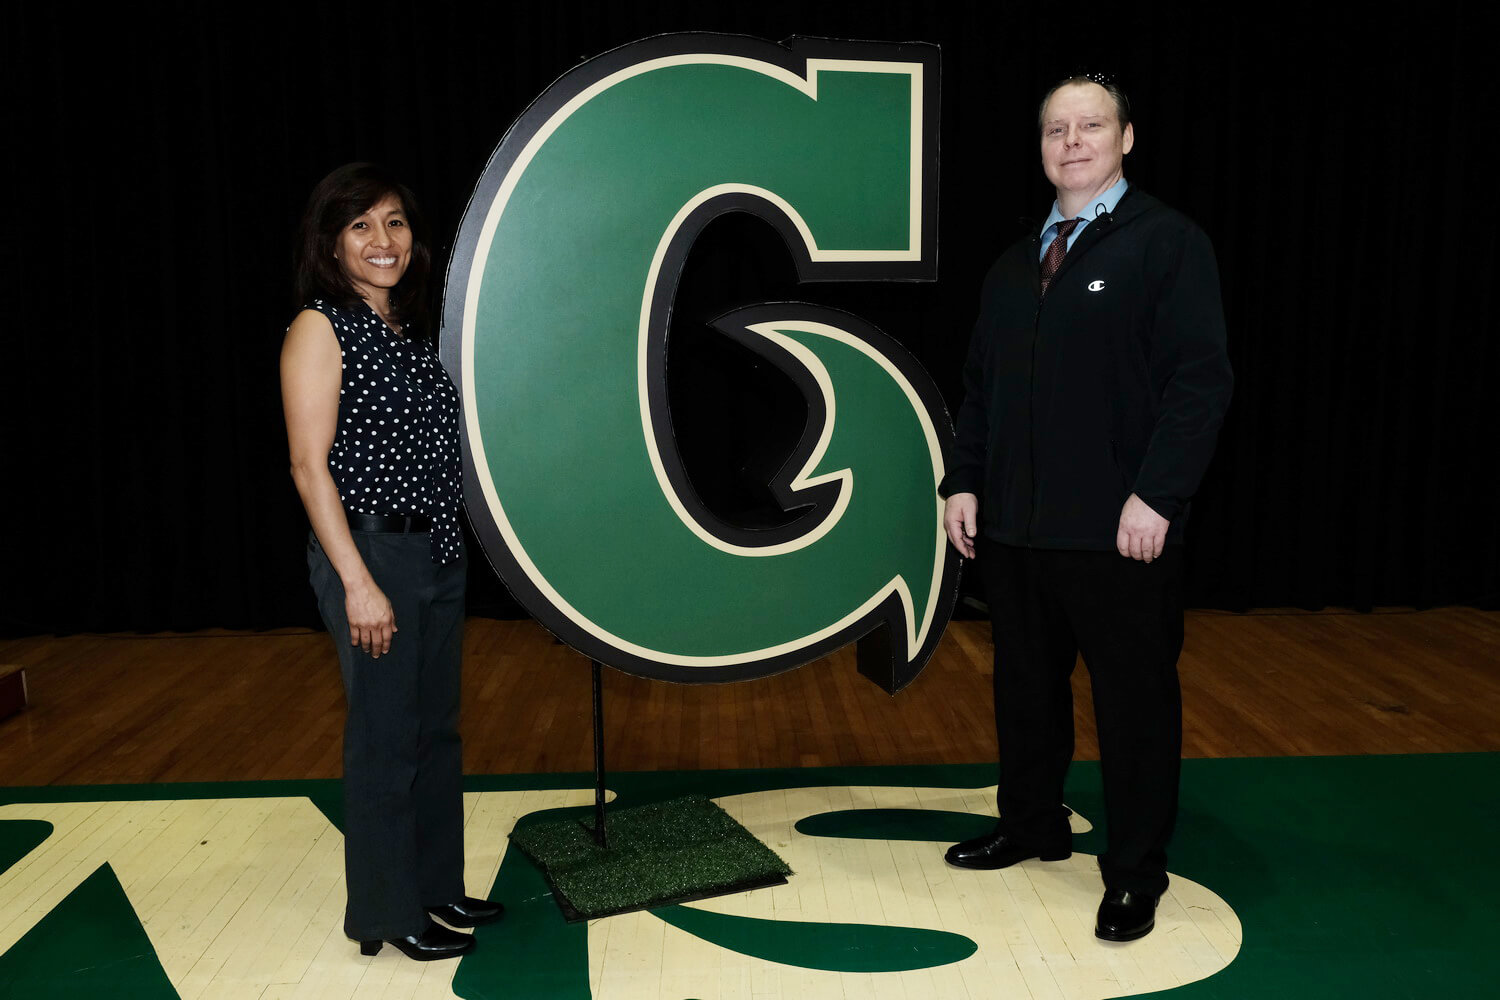 New coaches for 2019-2020, Cecile Olandez and Gary Larkin 